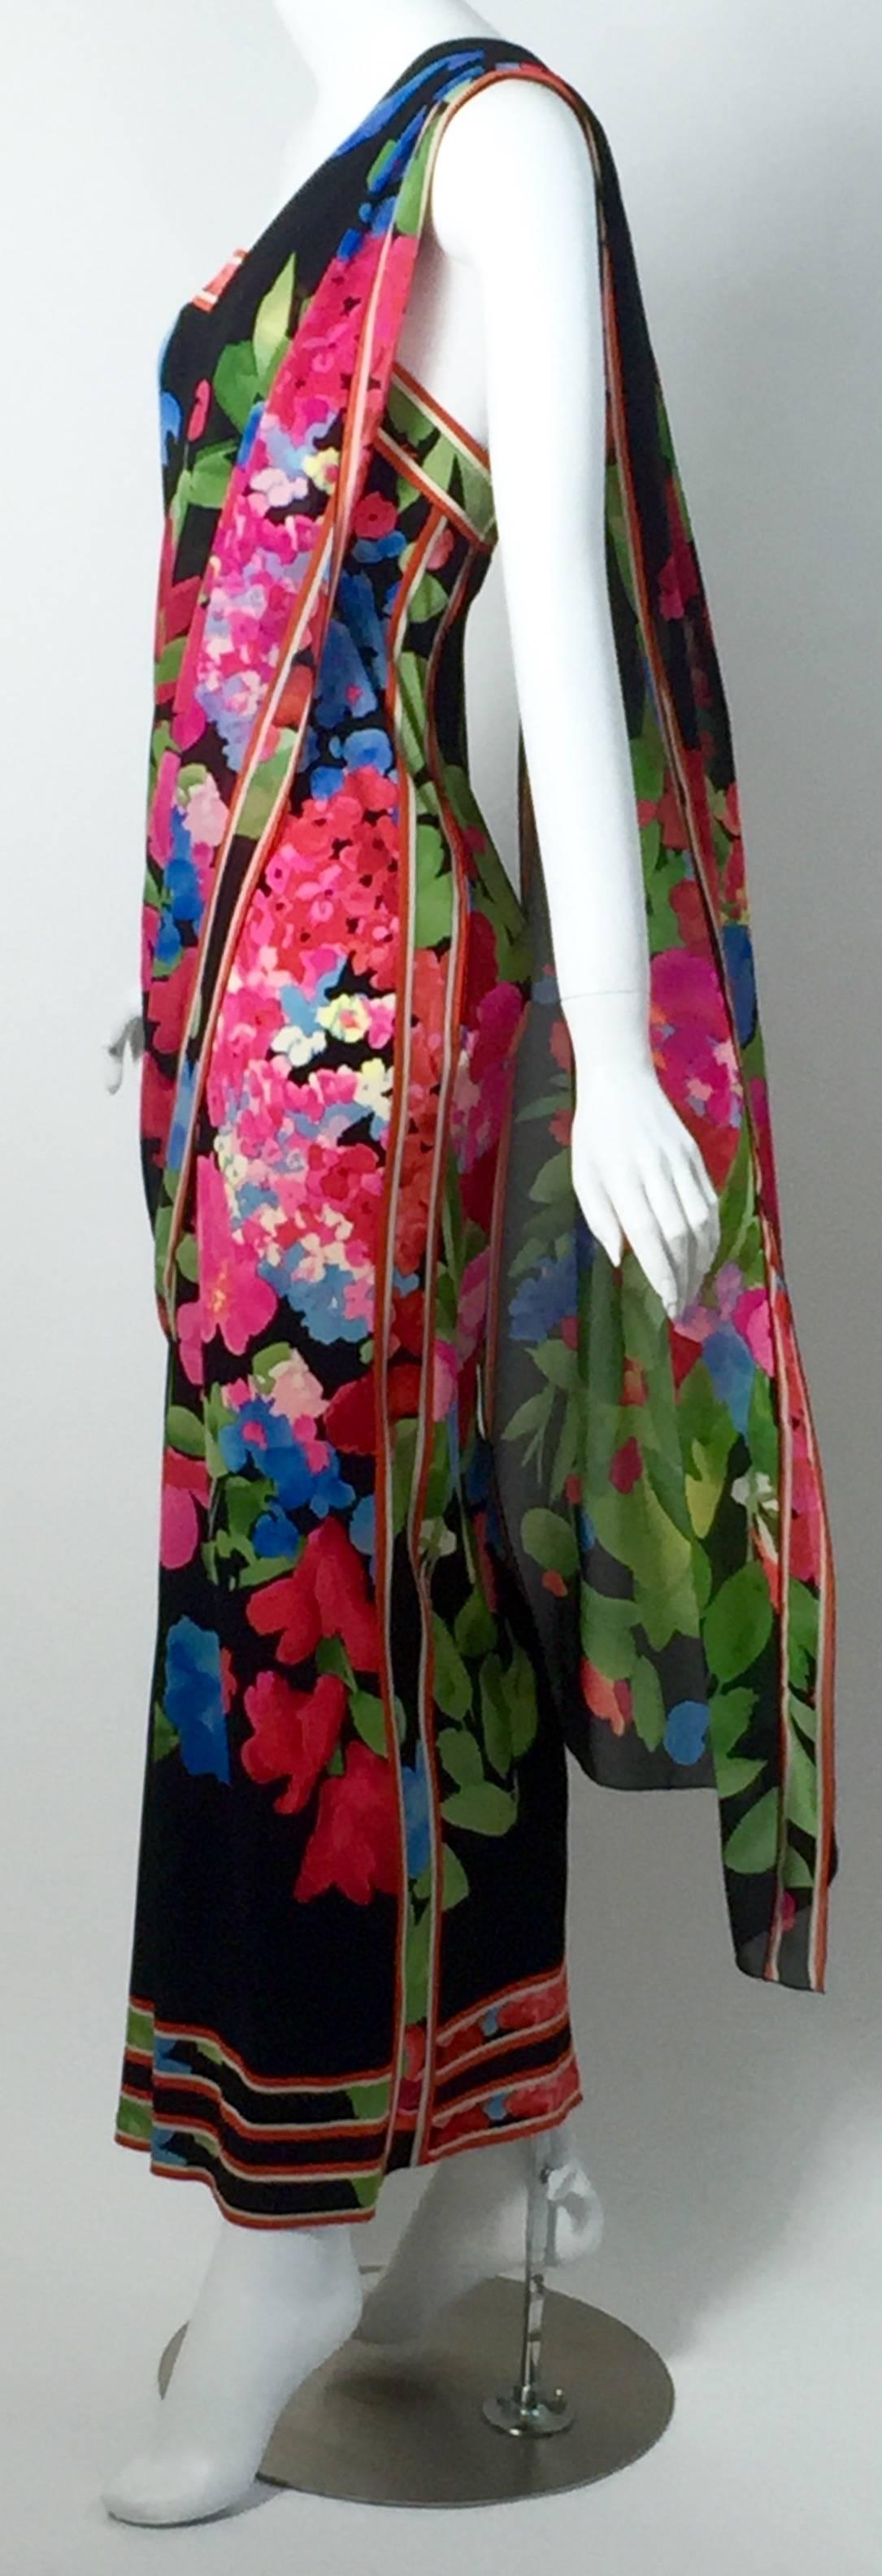 Leonard Paris is known for its mouthwatering prints, like the one found on this fabulous dress from the Seventies. A garden of watercolored flowers in vivid pinks, reds, blues and greens beautifully blooms on the strapless silk jersey column